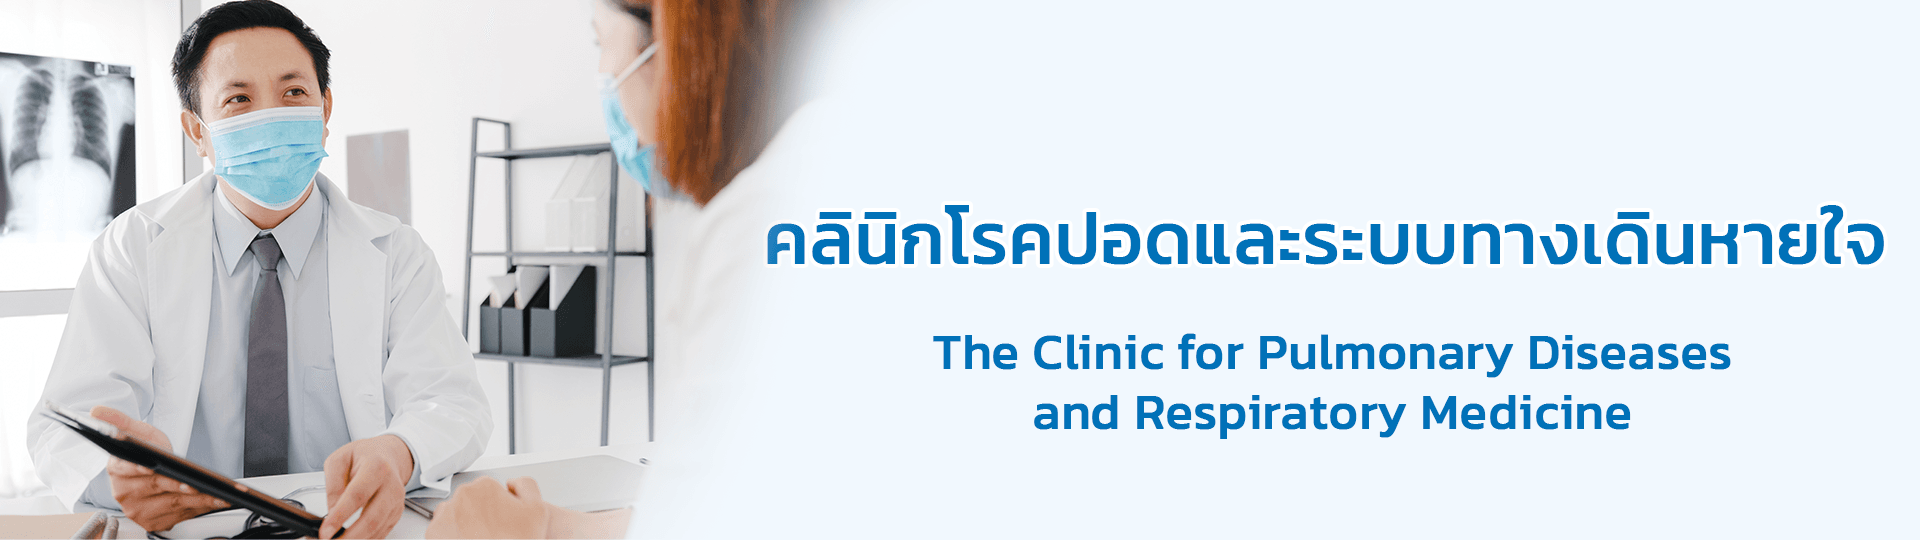 The Clinic for Pulmonary Diseases and Respiratory Medicine.png